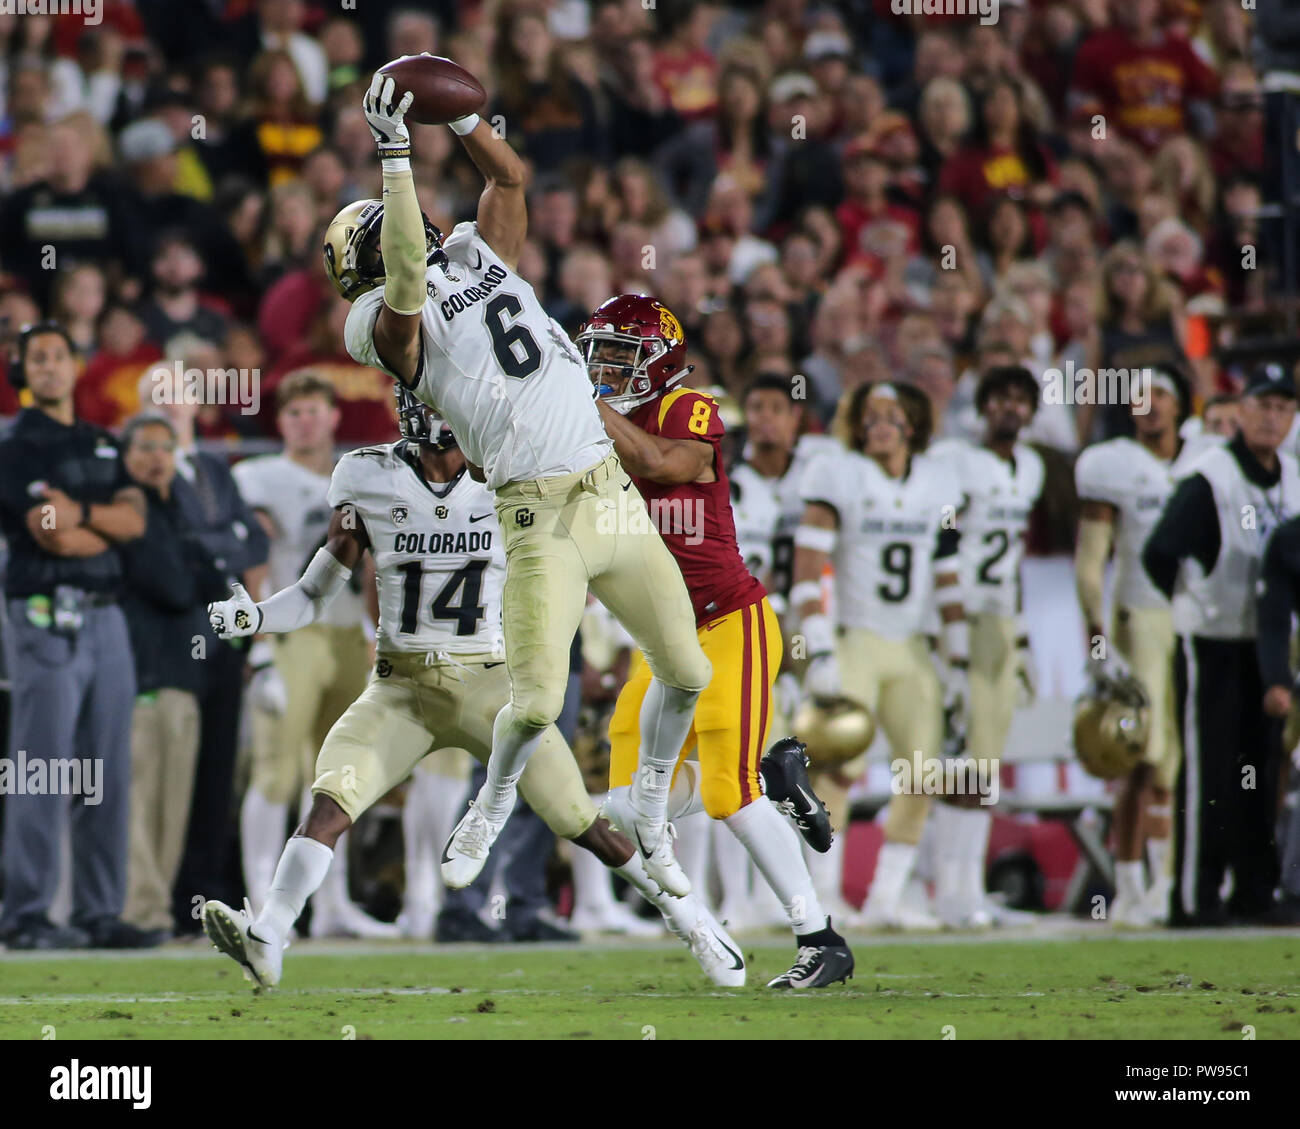 colorado-buffaloes-wide-receiver-curtis-chiaverini-6-with-the-catch-during-the-colorado-buffaloes-vs-usc-trojans-pac-12-football-game-at-the-los-angeles-memorial-coliseum-on-saturday-october-13-2018-photo-by-jevone-moore-PW95C1.jpg